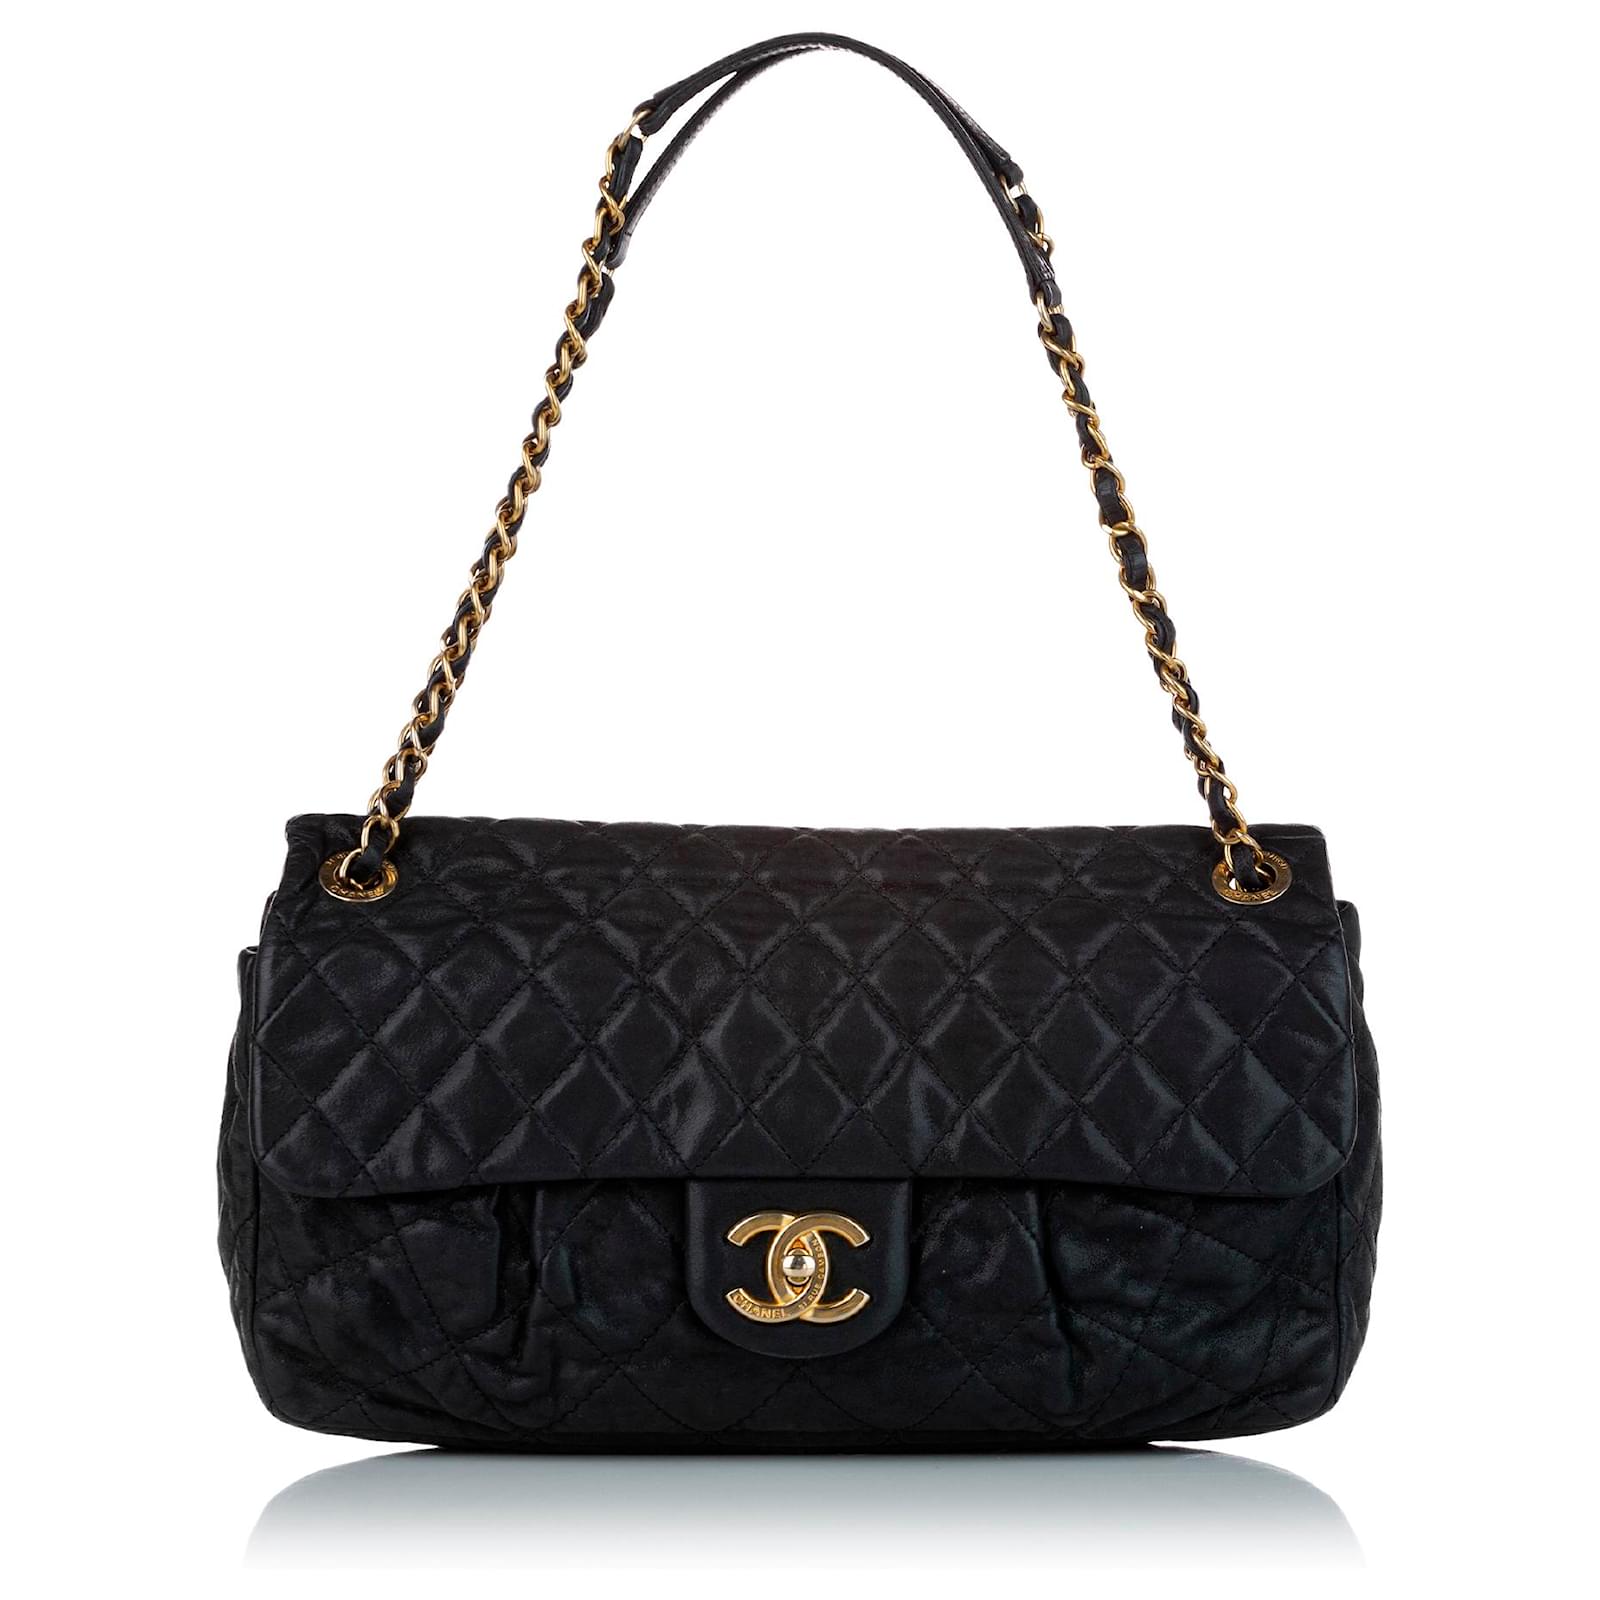 Chanel Black Quilted Calfskin Leather Single Flap Bag